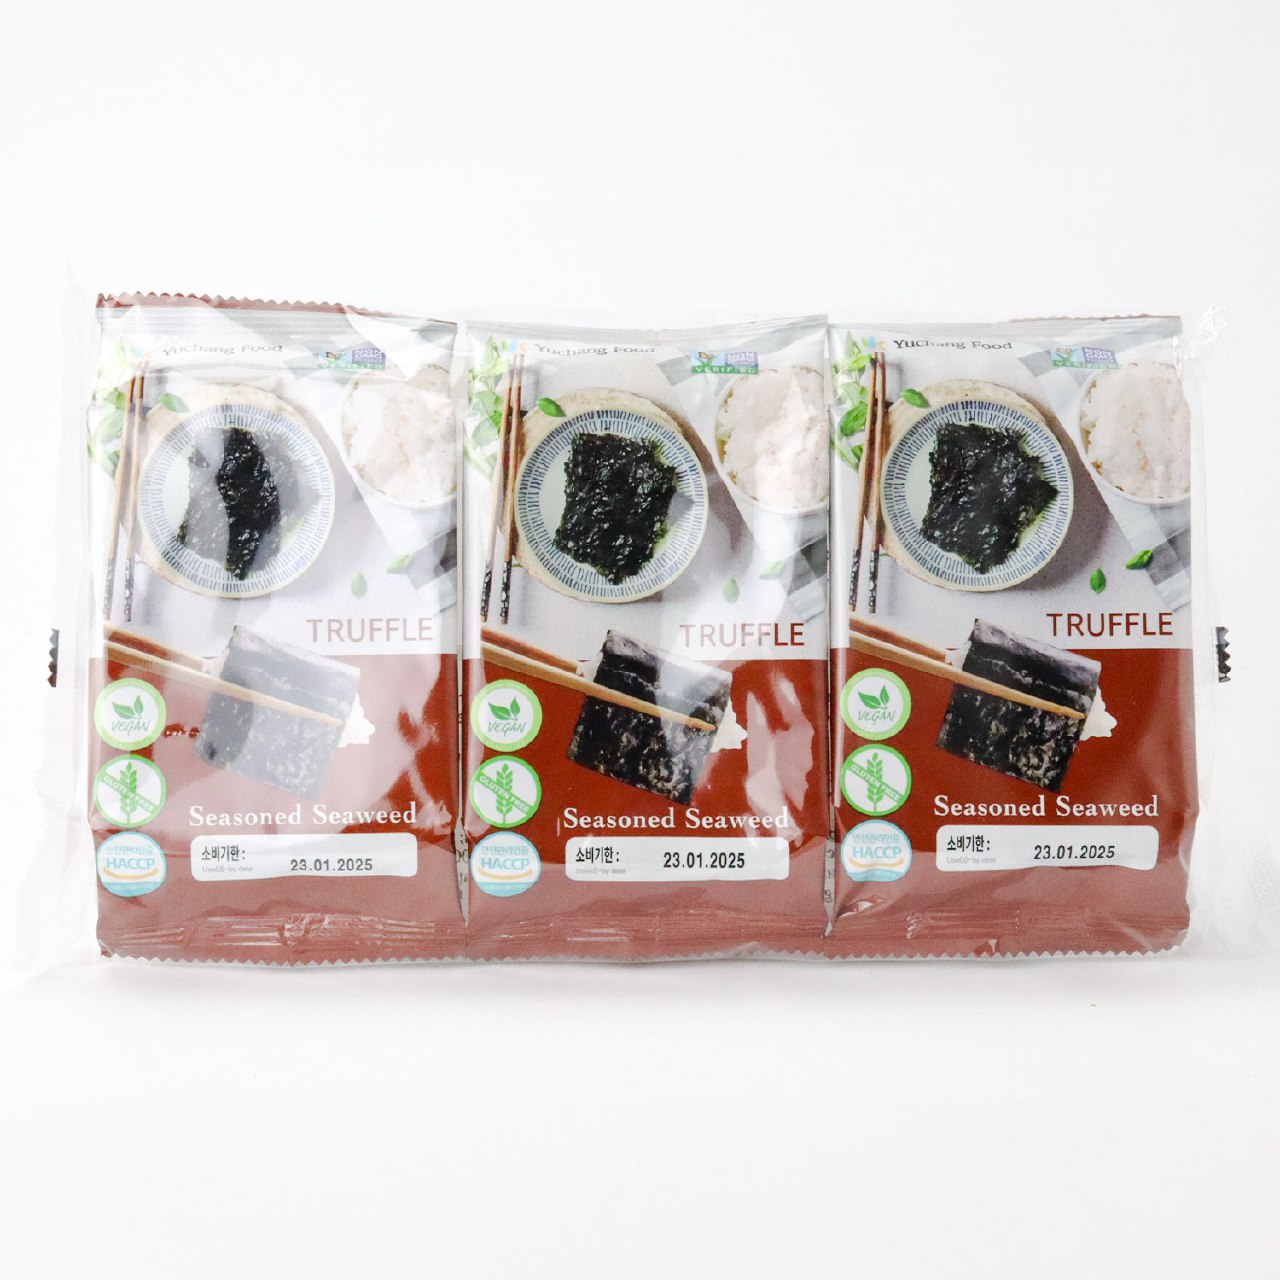 Seaweed snack with truffle 3 pcs